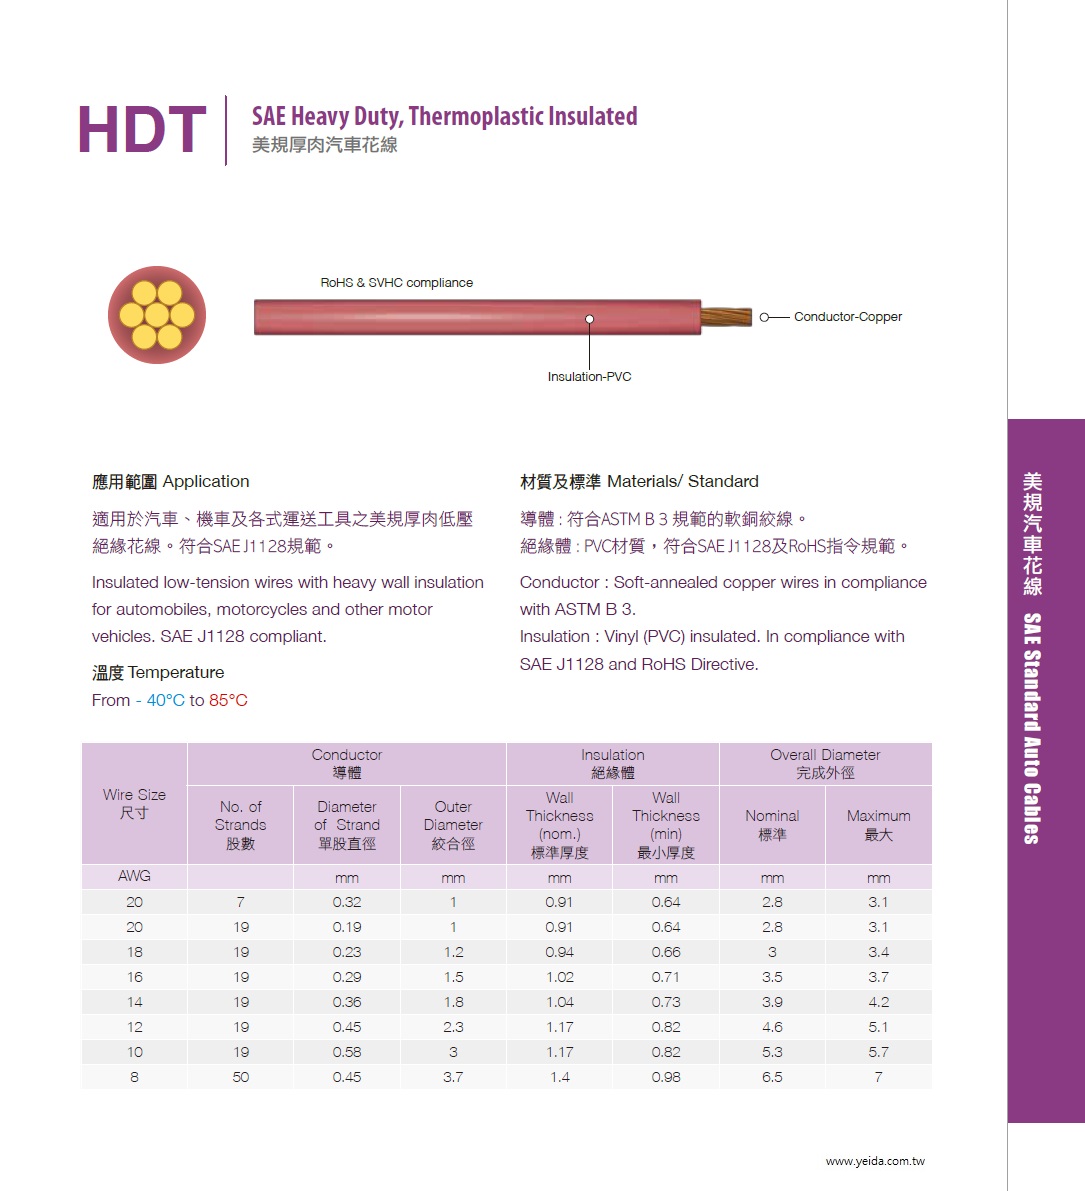 HDT SAE J1128 low-tension wires with heavy wall, Thermoplastic Insulated PVC美規厚肉汽車花線產品圖